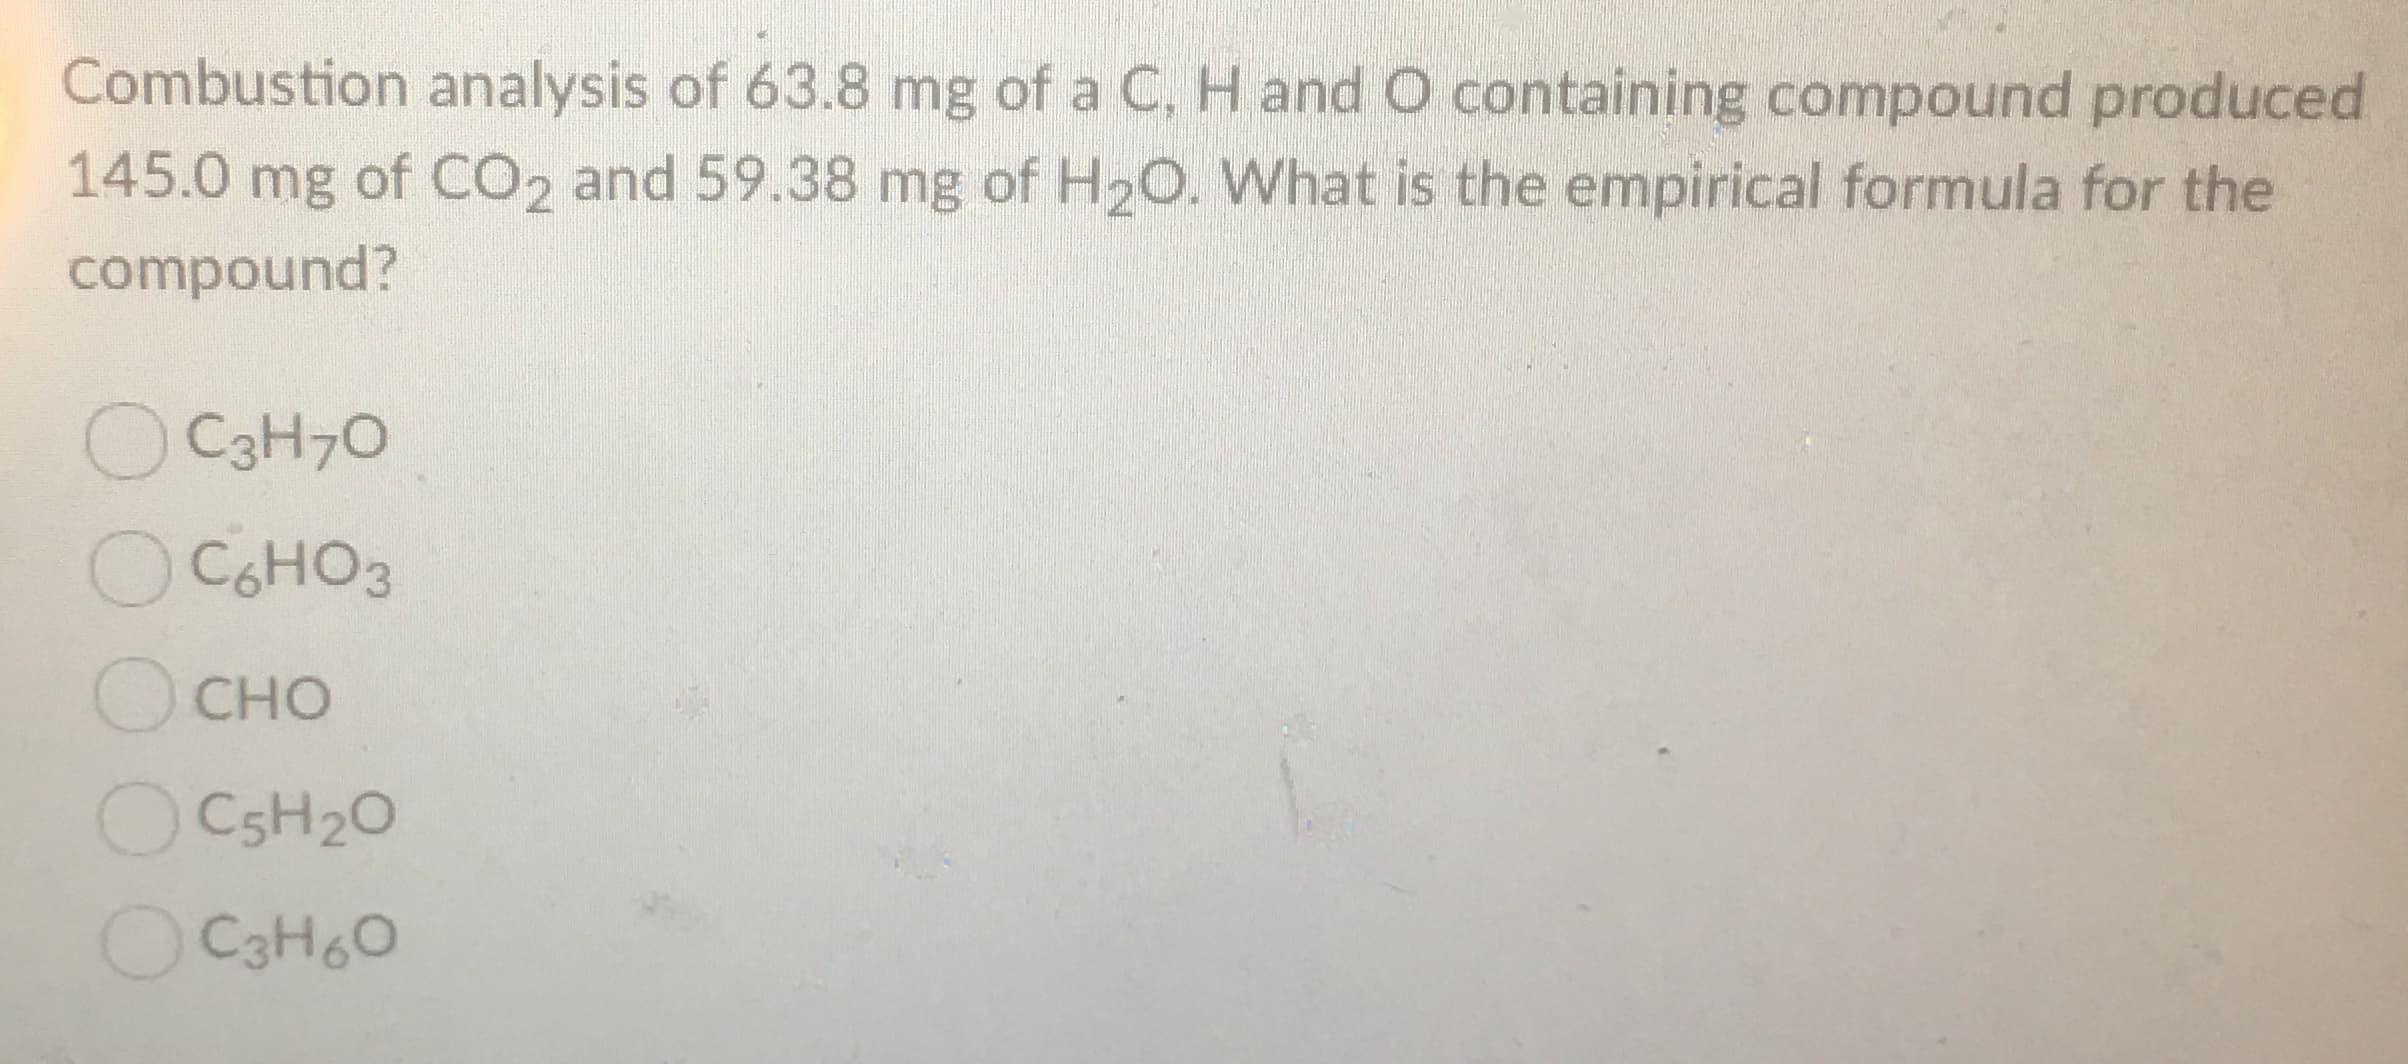 Combustion analysis of 63.8 mg of a C, H andO containing compound produced
145.0 mg of CO2 and 59.38 mg of H2O. What is the empirical formula for the
compound?
OC3H7O
OC6HO3
CHO
OC5H20
OCaH6o
